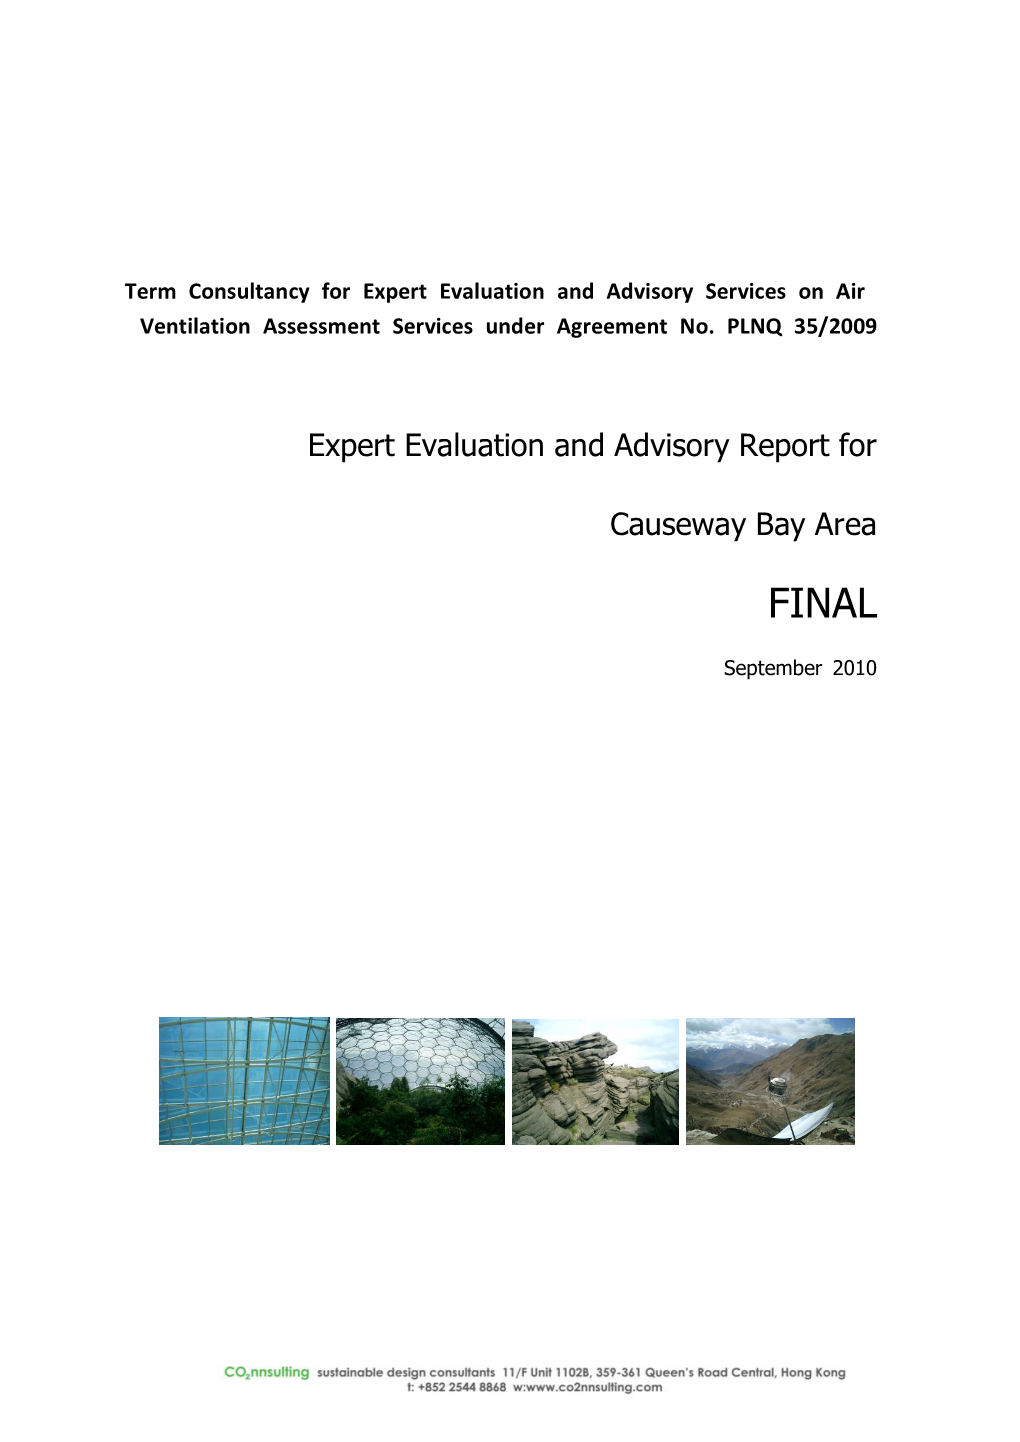 Expert Evaluation and Advisory Report for Causeway Bay Area